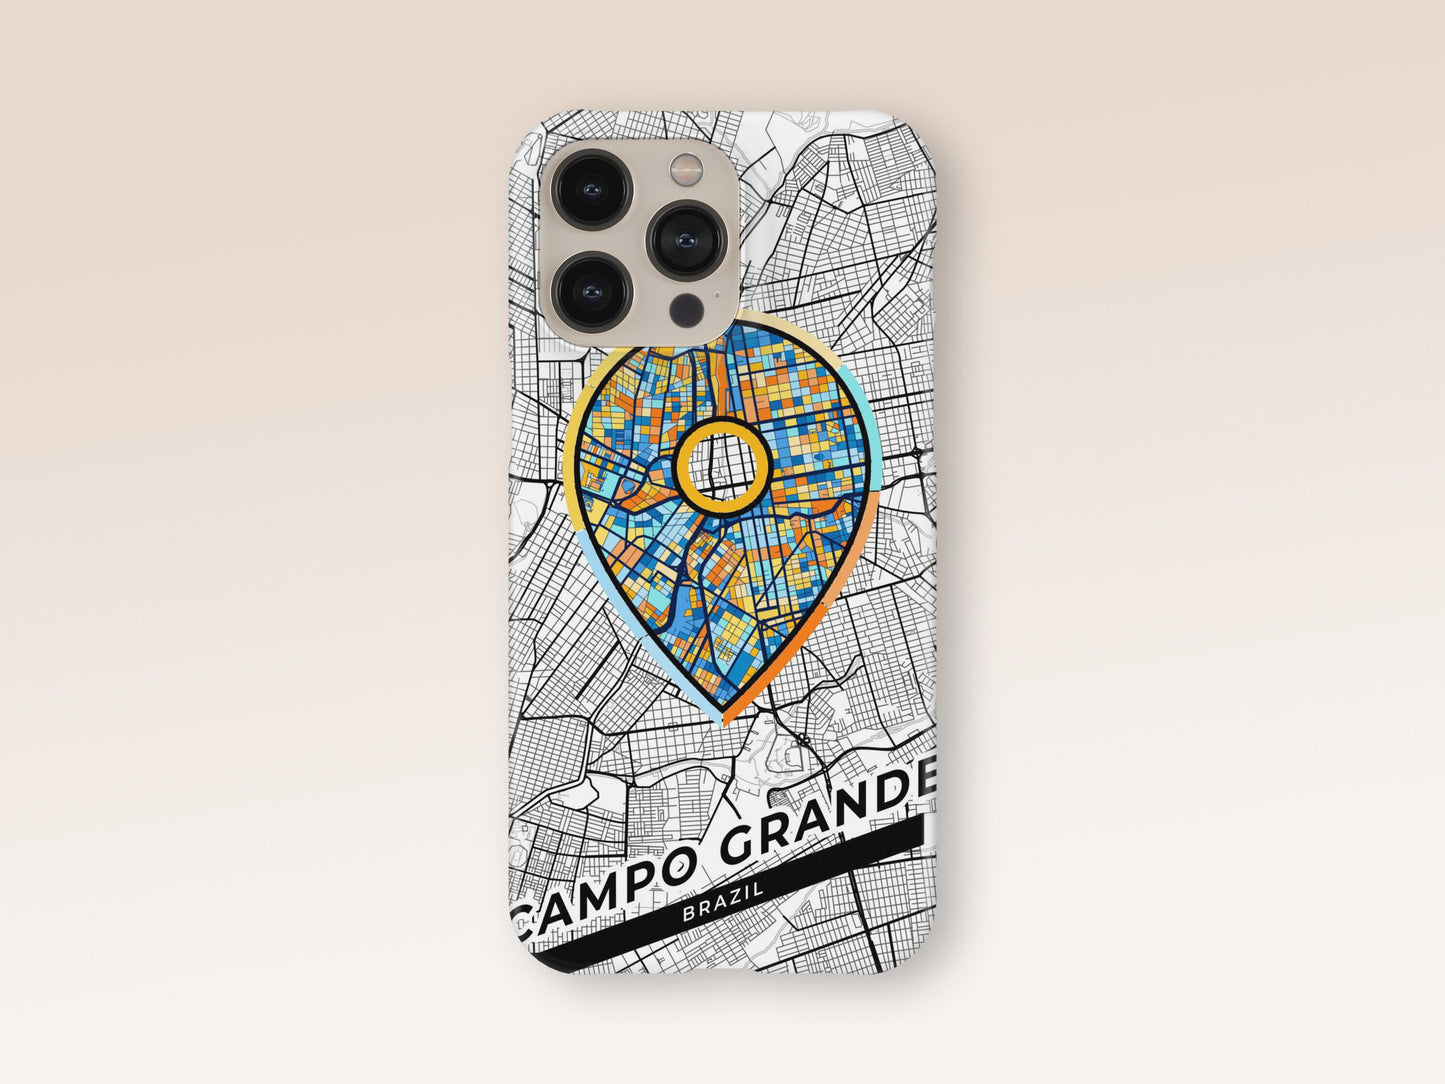 Campo Grande Brazil slim phone case with colorful icon. Birthday, wedding or housewarming gift. Couple match cases. 1